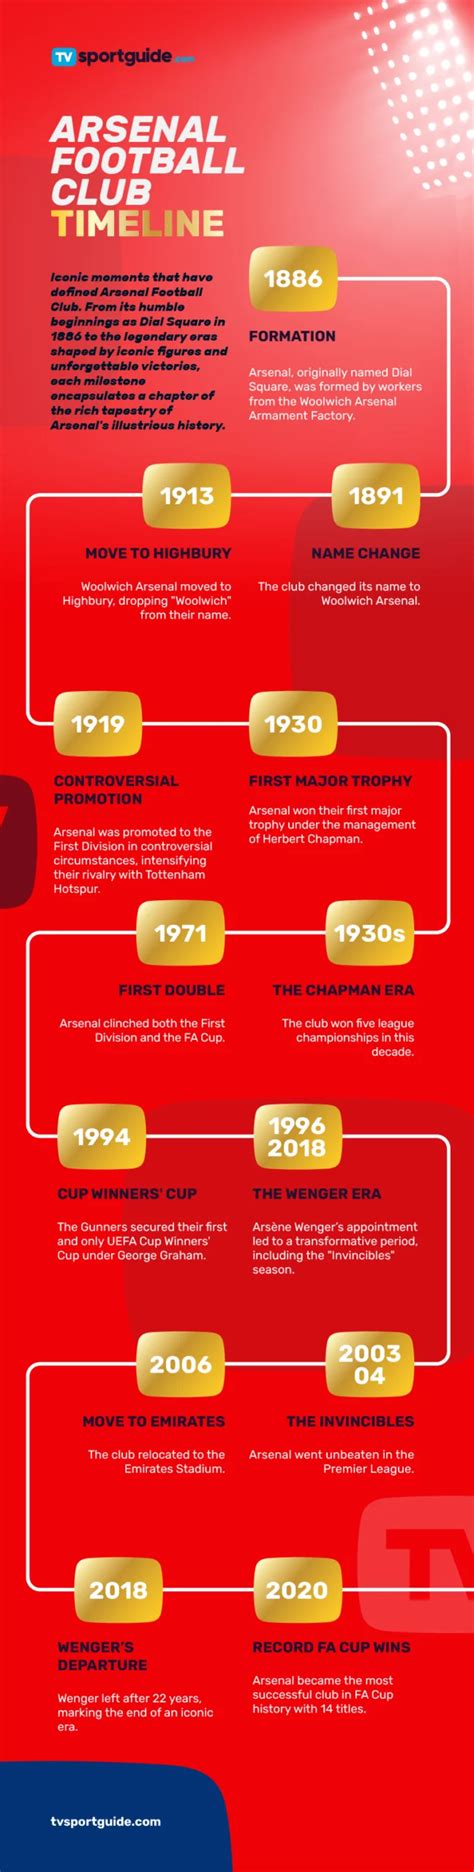 Arsenals History A Detailed Timeline Of Iconic Moments And Achievements